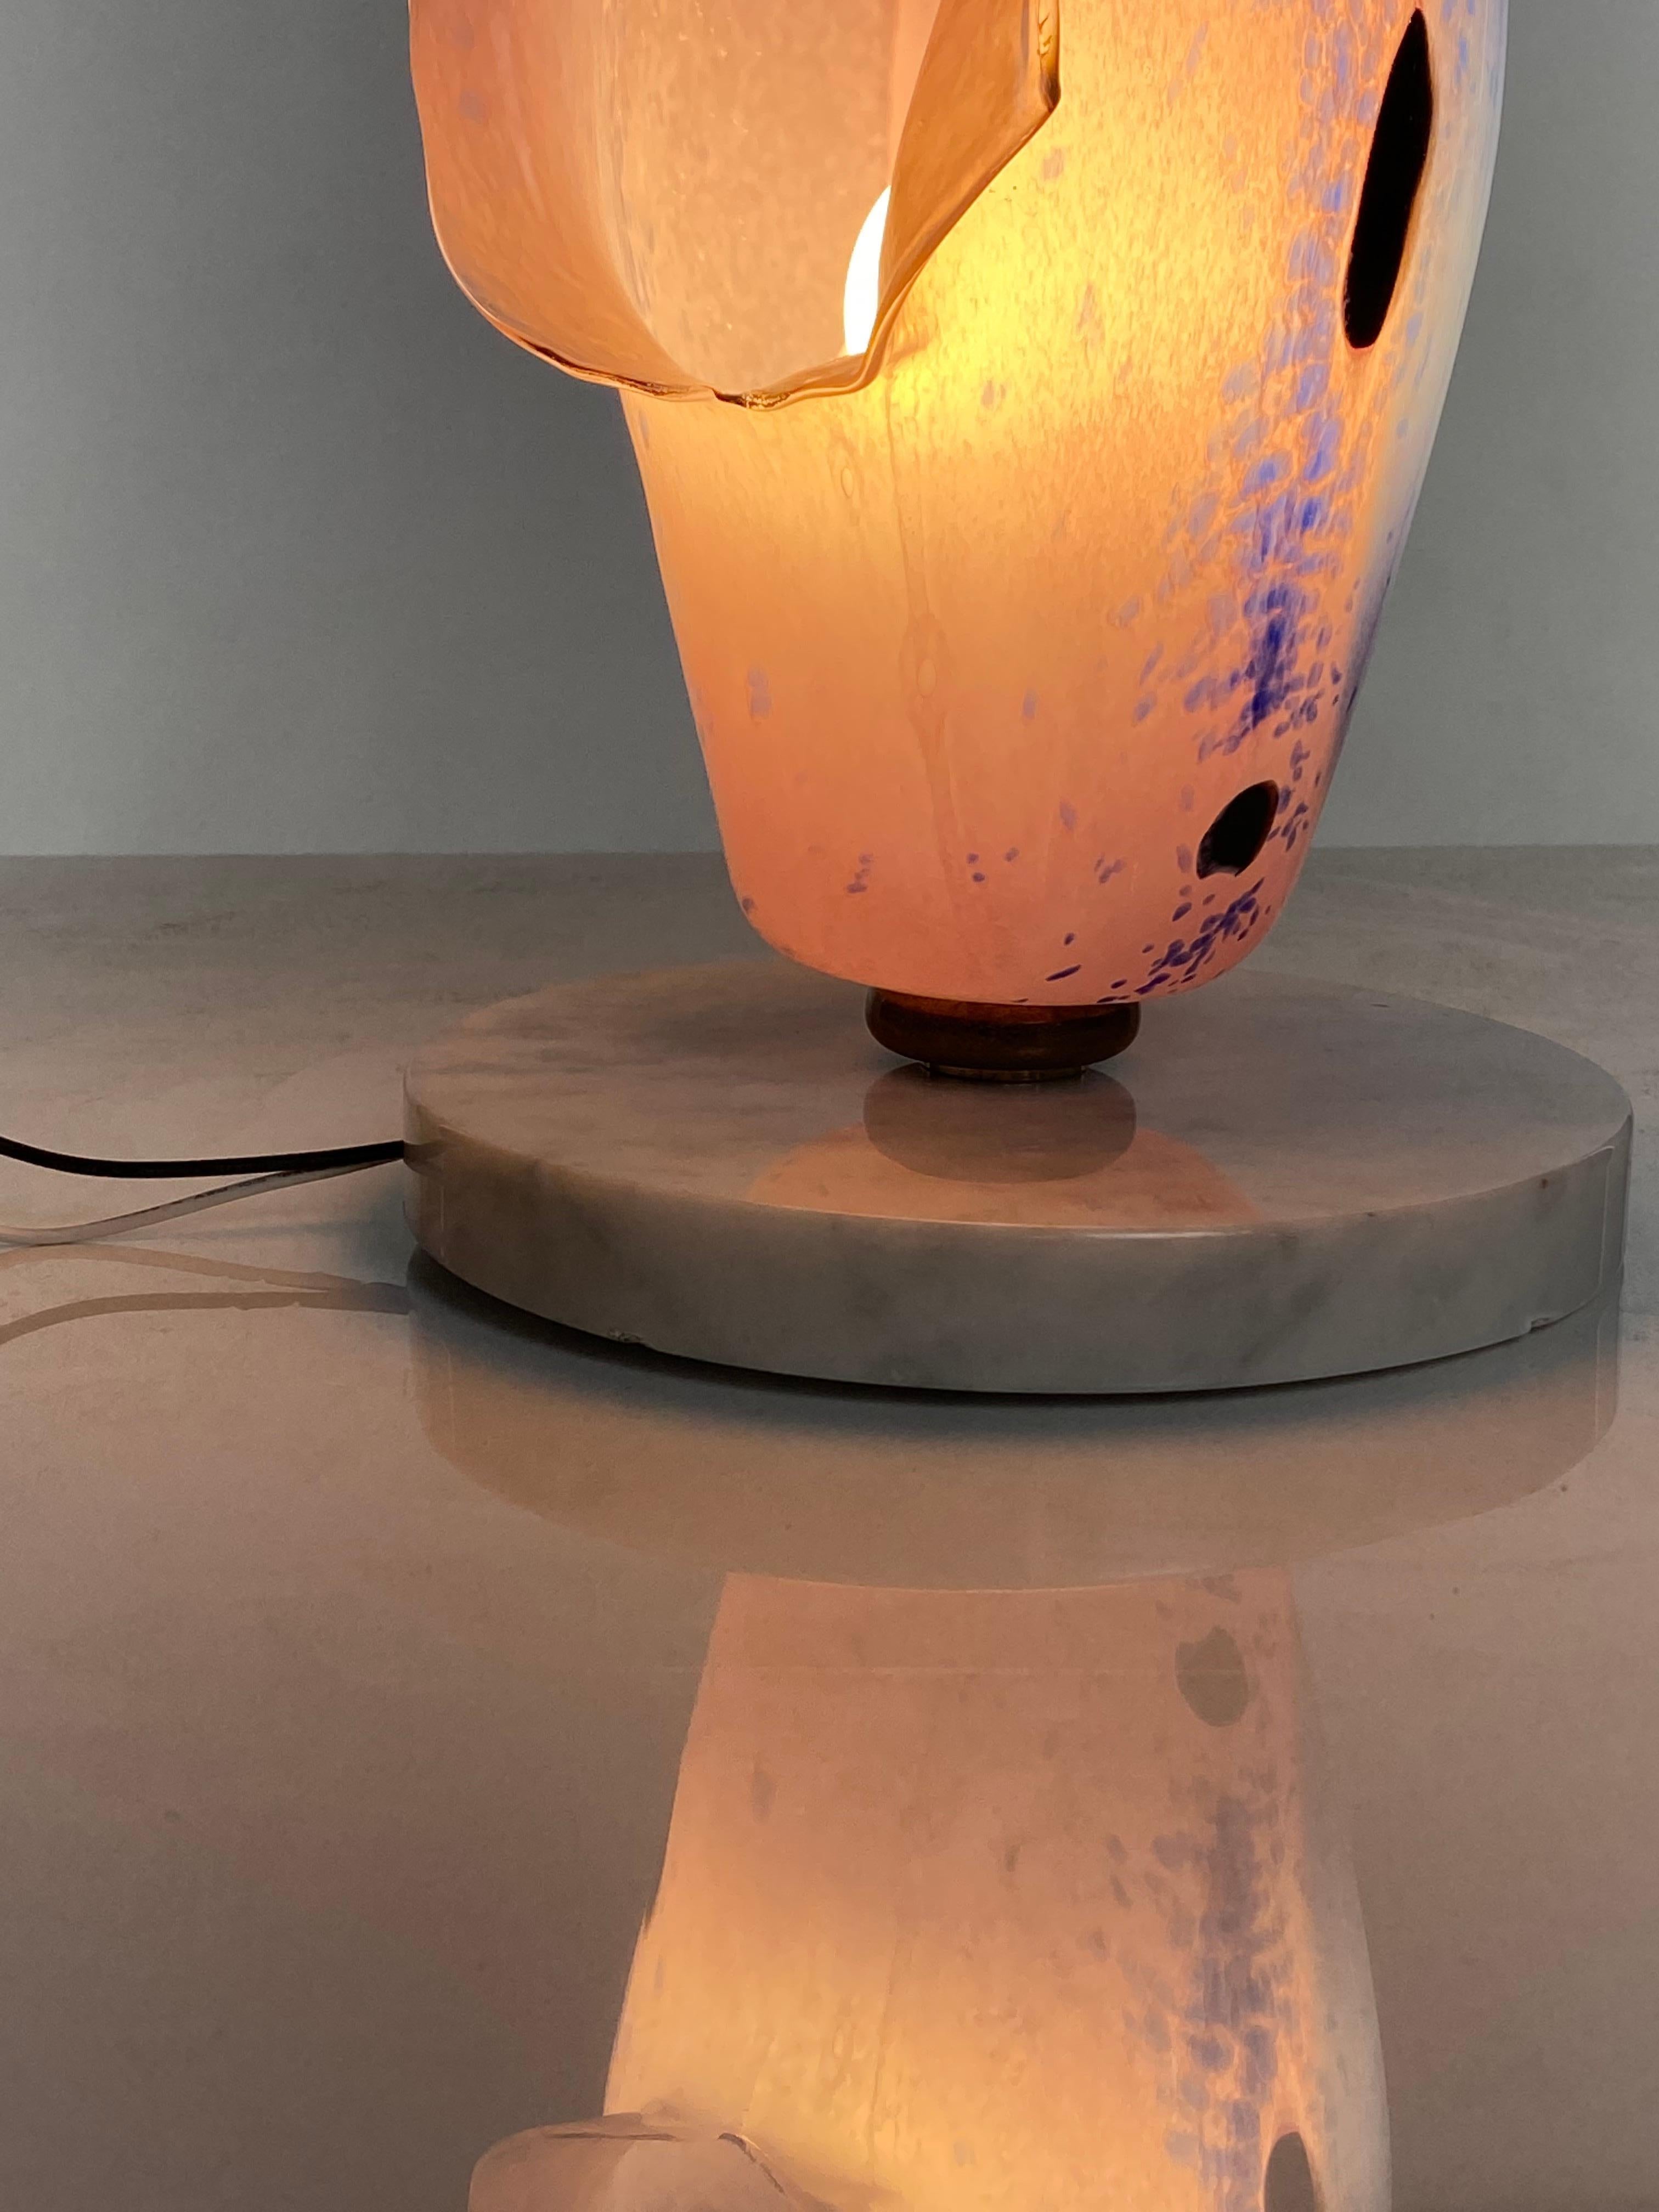 Contemporary Blown Glass Pink and Blue, Marble, Table Lamp Light, 21st Century by Mattia Biagi